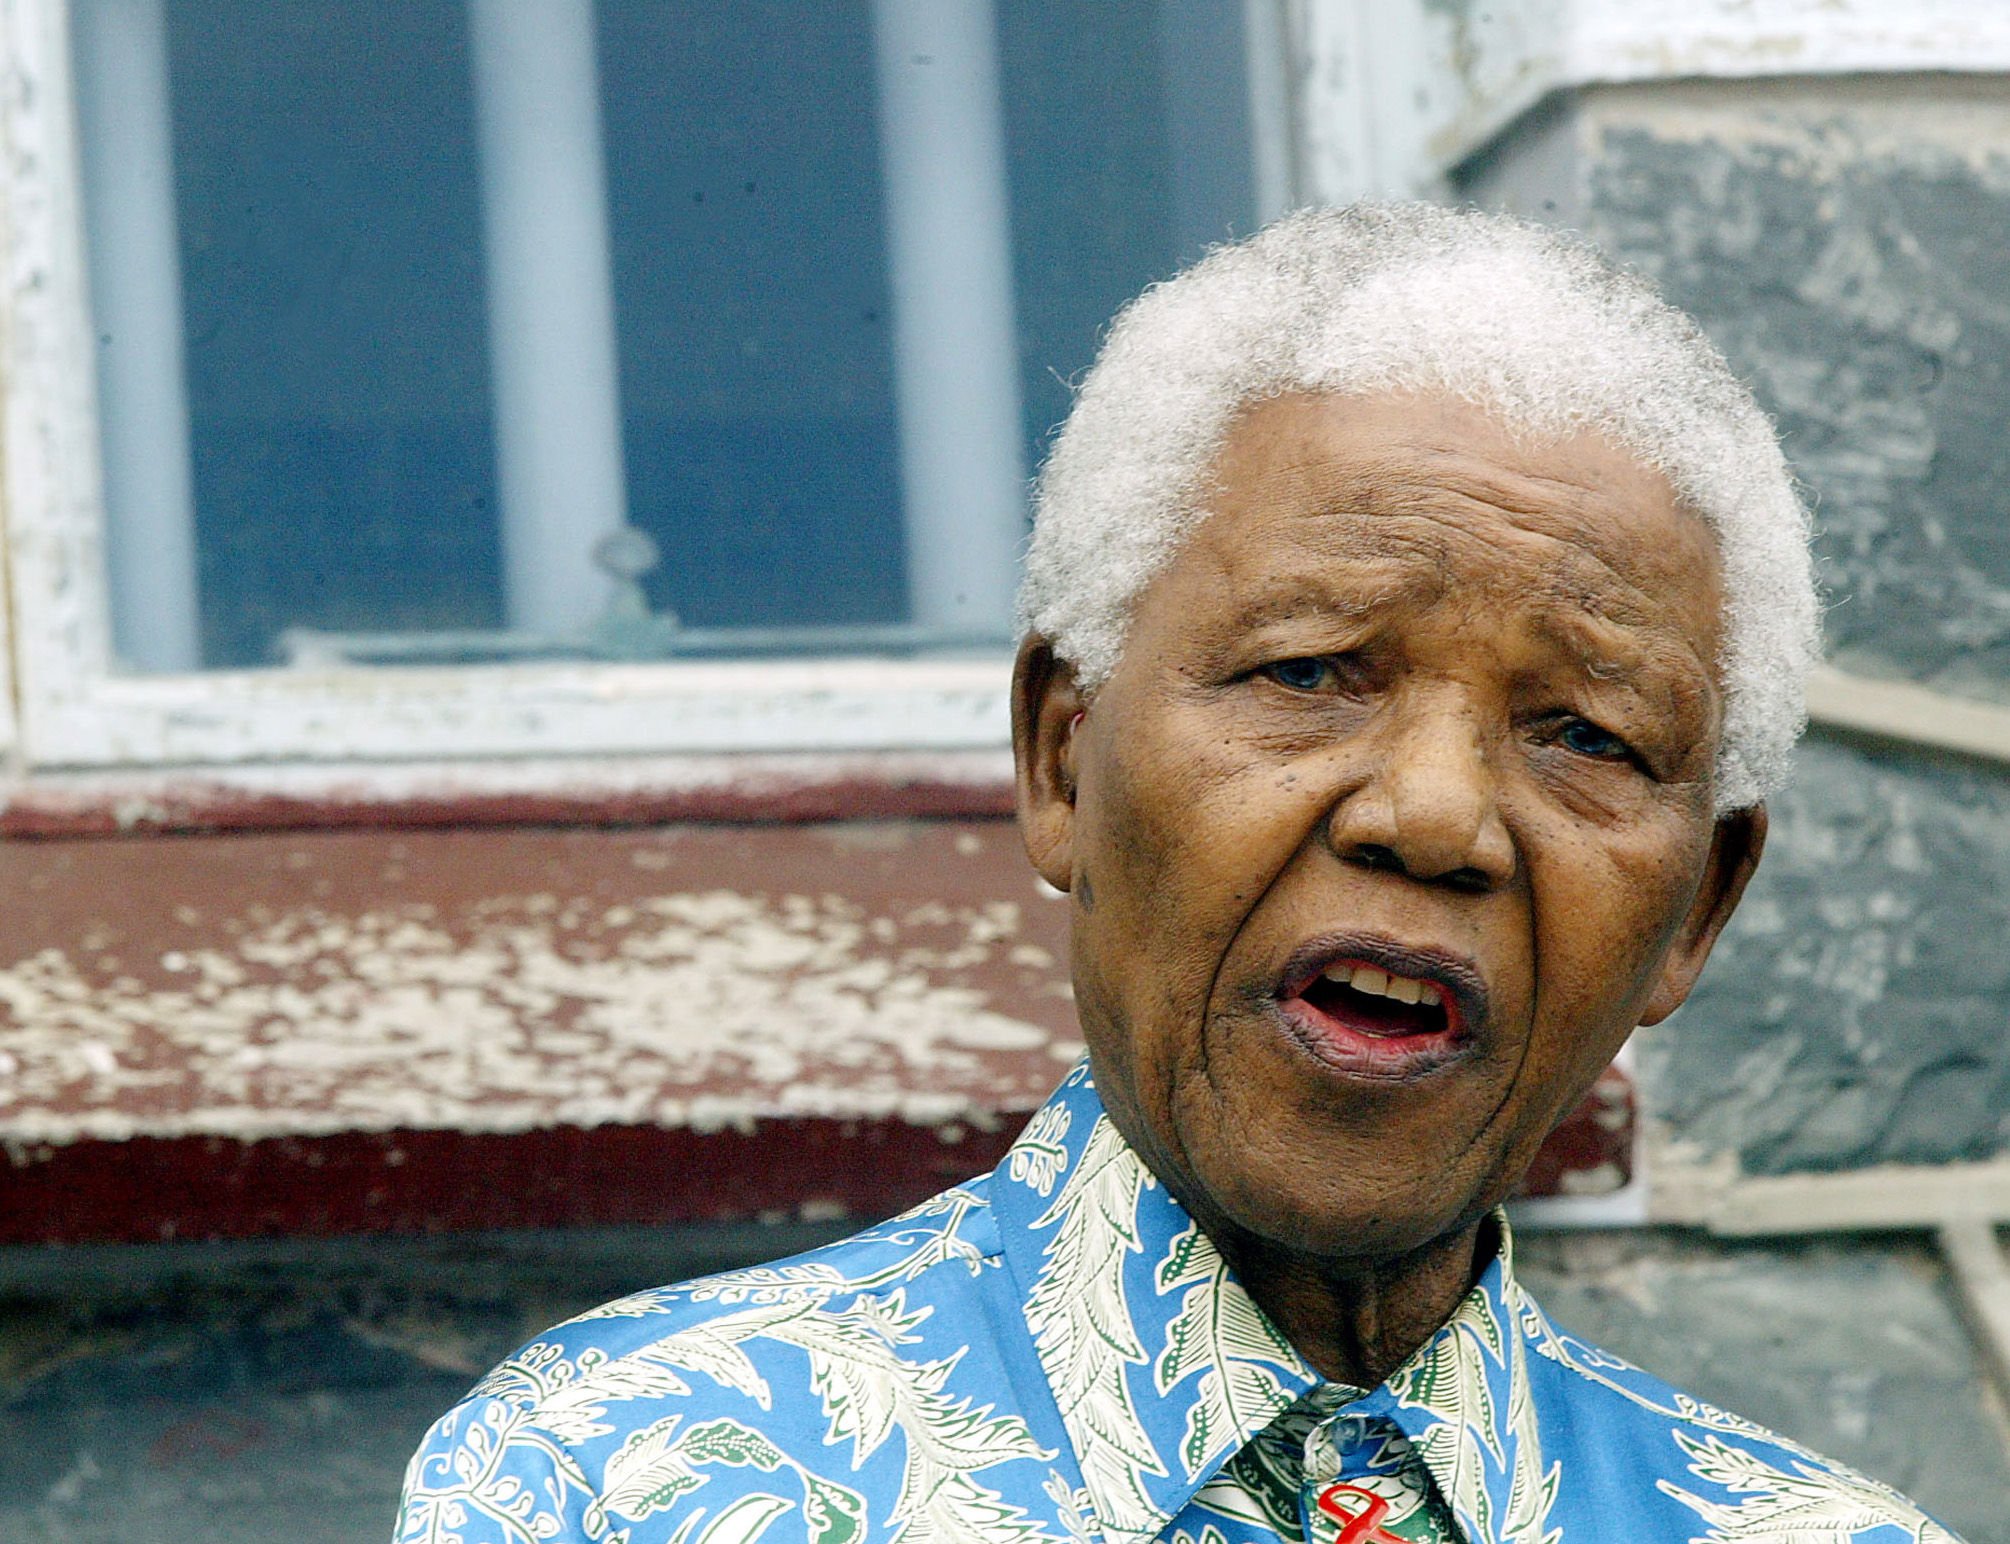 Nelson Mandela addresses musicians beneath the window of his prison cell on Robben Island, November 2003. Mandela visited the island with stars who were to perform at the 46664 Aids benefit concert.